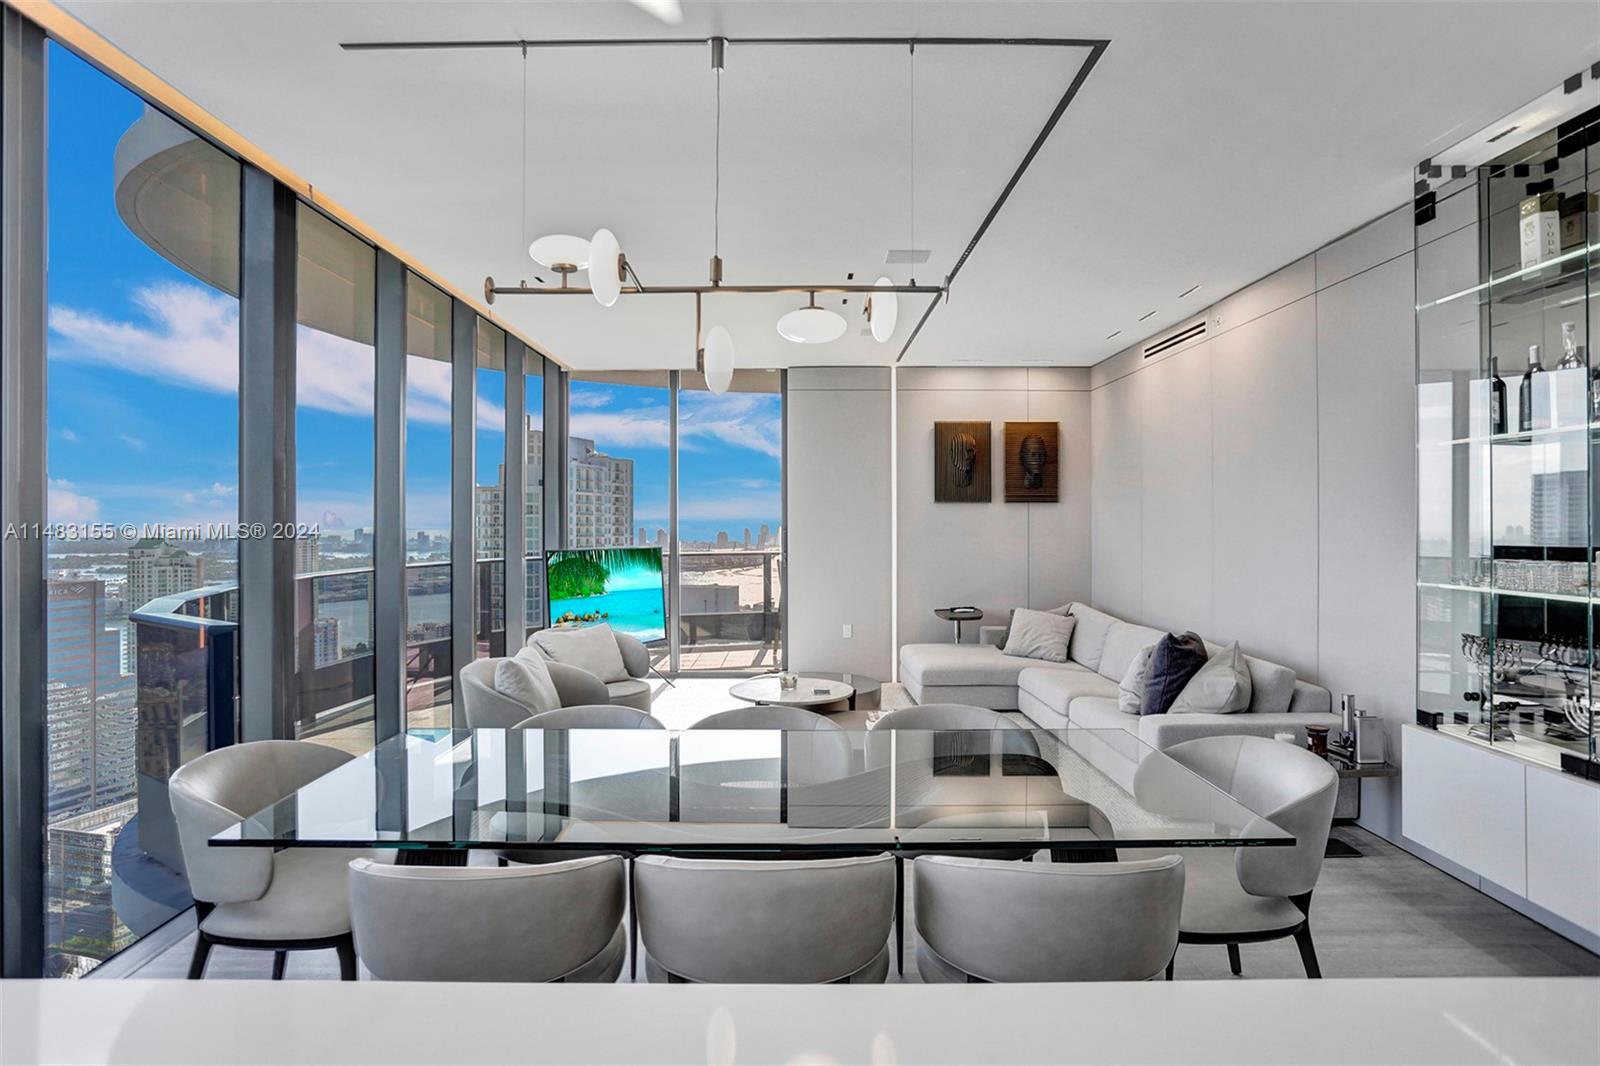 Welcome to Brickell Flatiron. This corner penthouse residence boasts breathtaking views of the city 